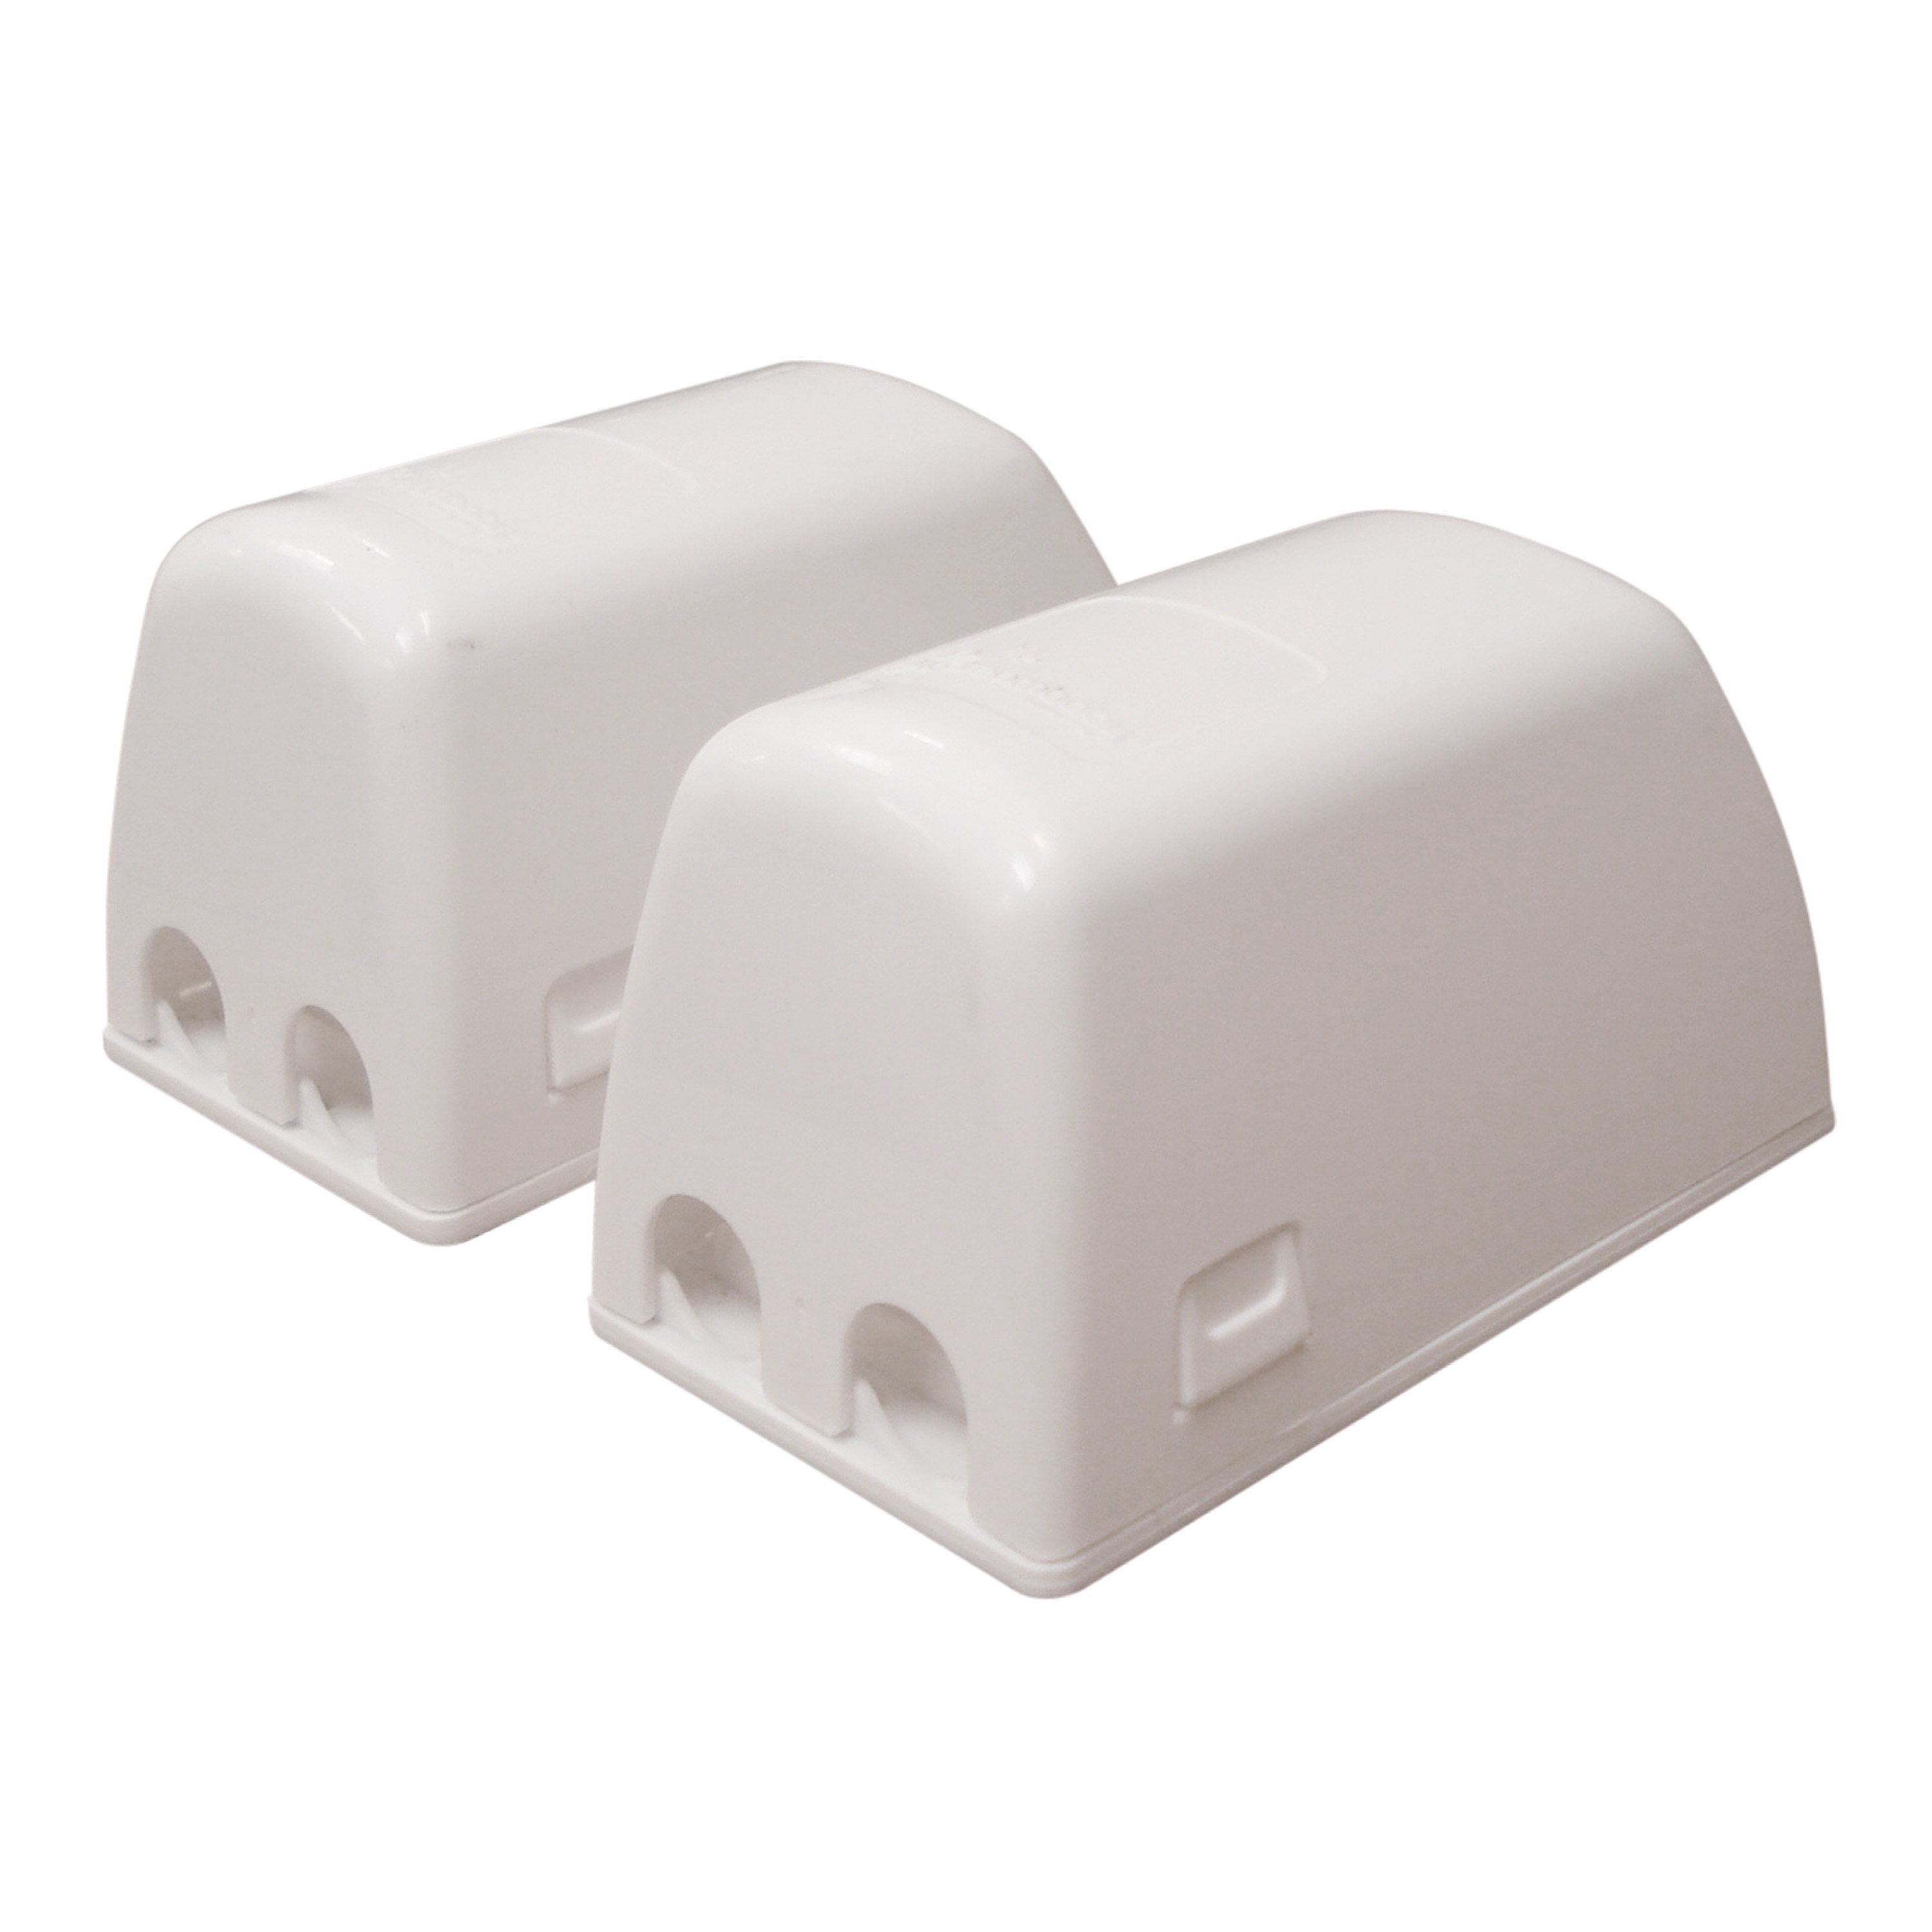 Dreambaby Dual Fit Plug and Electrical Outlet Cover (2-Pack), White